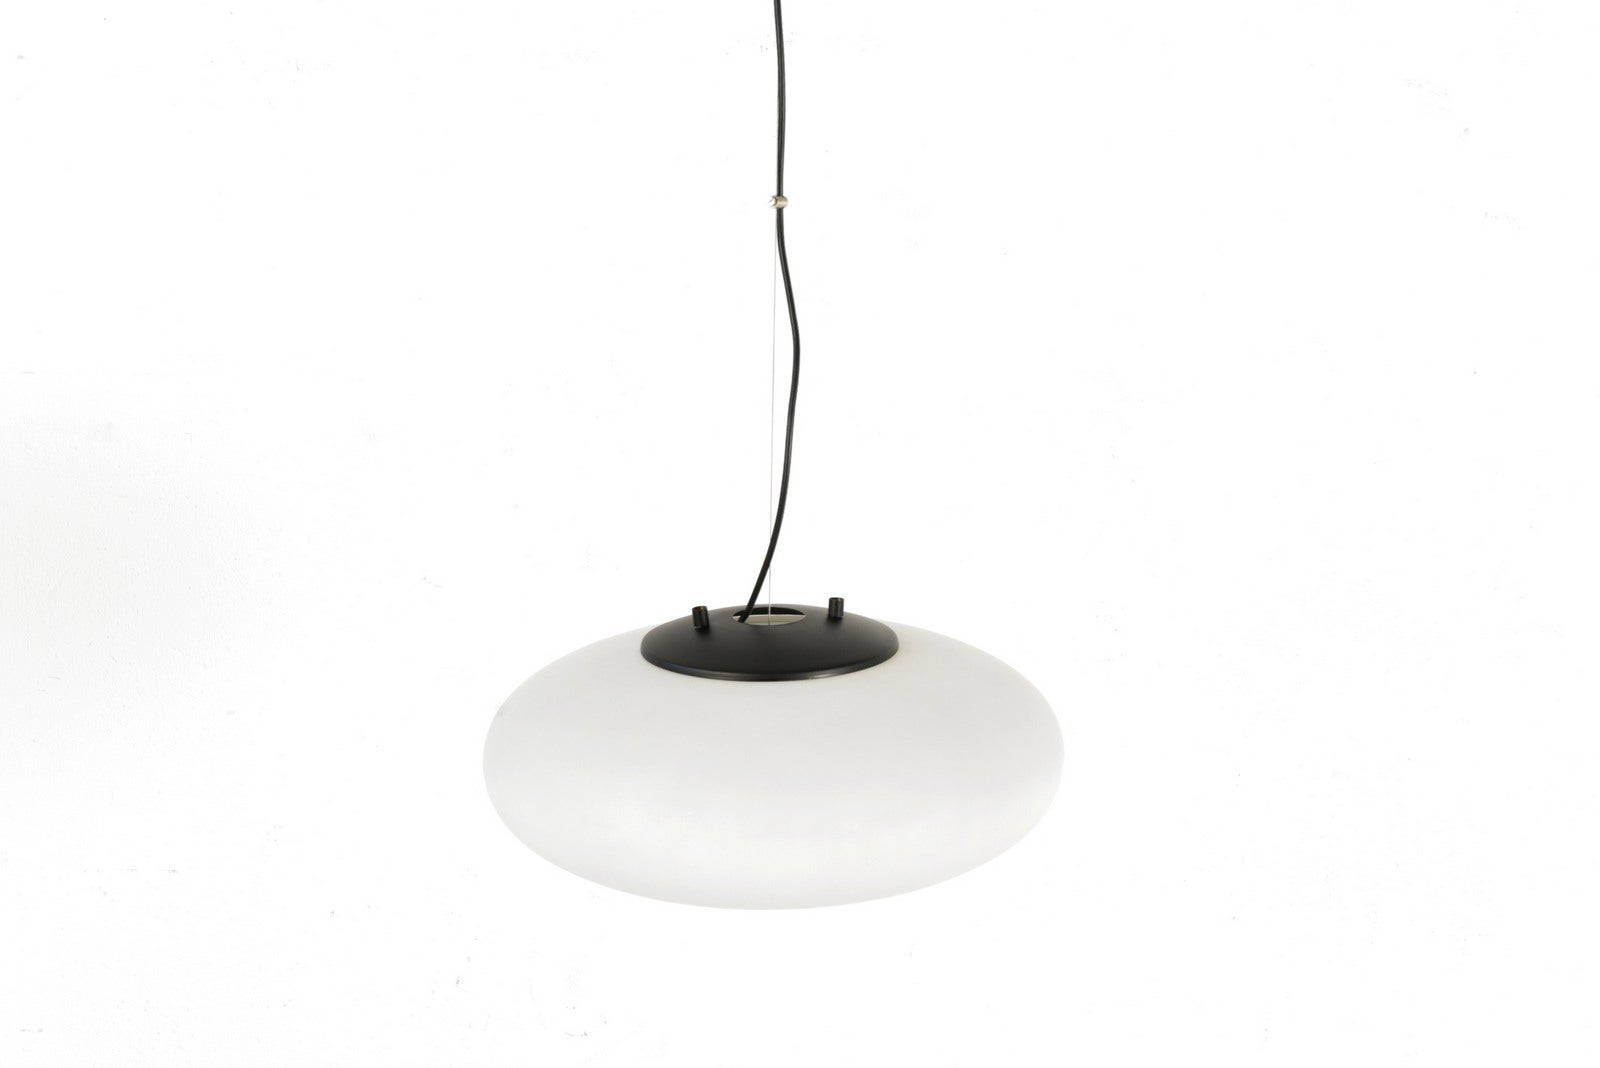 H 180 cm W 45 cm D 45 cm

Material: Matt black lacquered brass, frosted frosted glass reflector, 1 E 27 light point, steel cable

Condition: good original condition

Special features: few signs of use. The rare pendant light was rewired by our